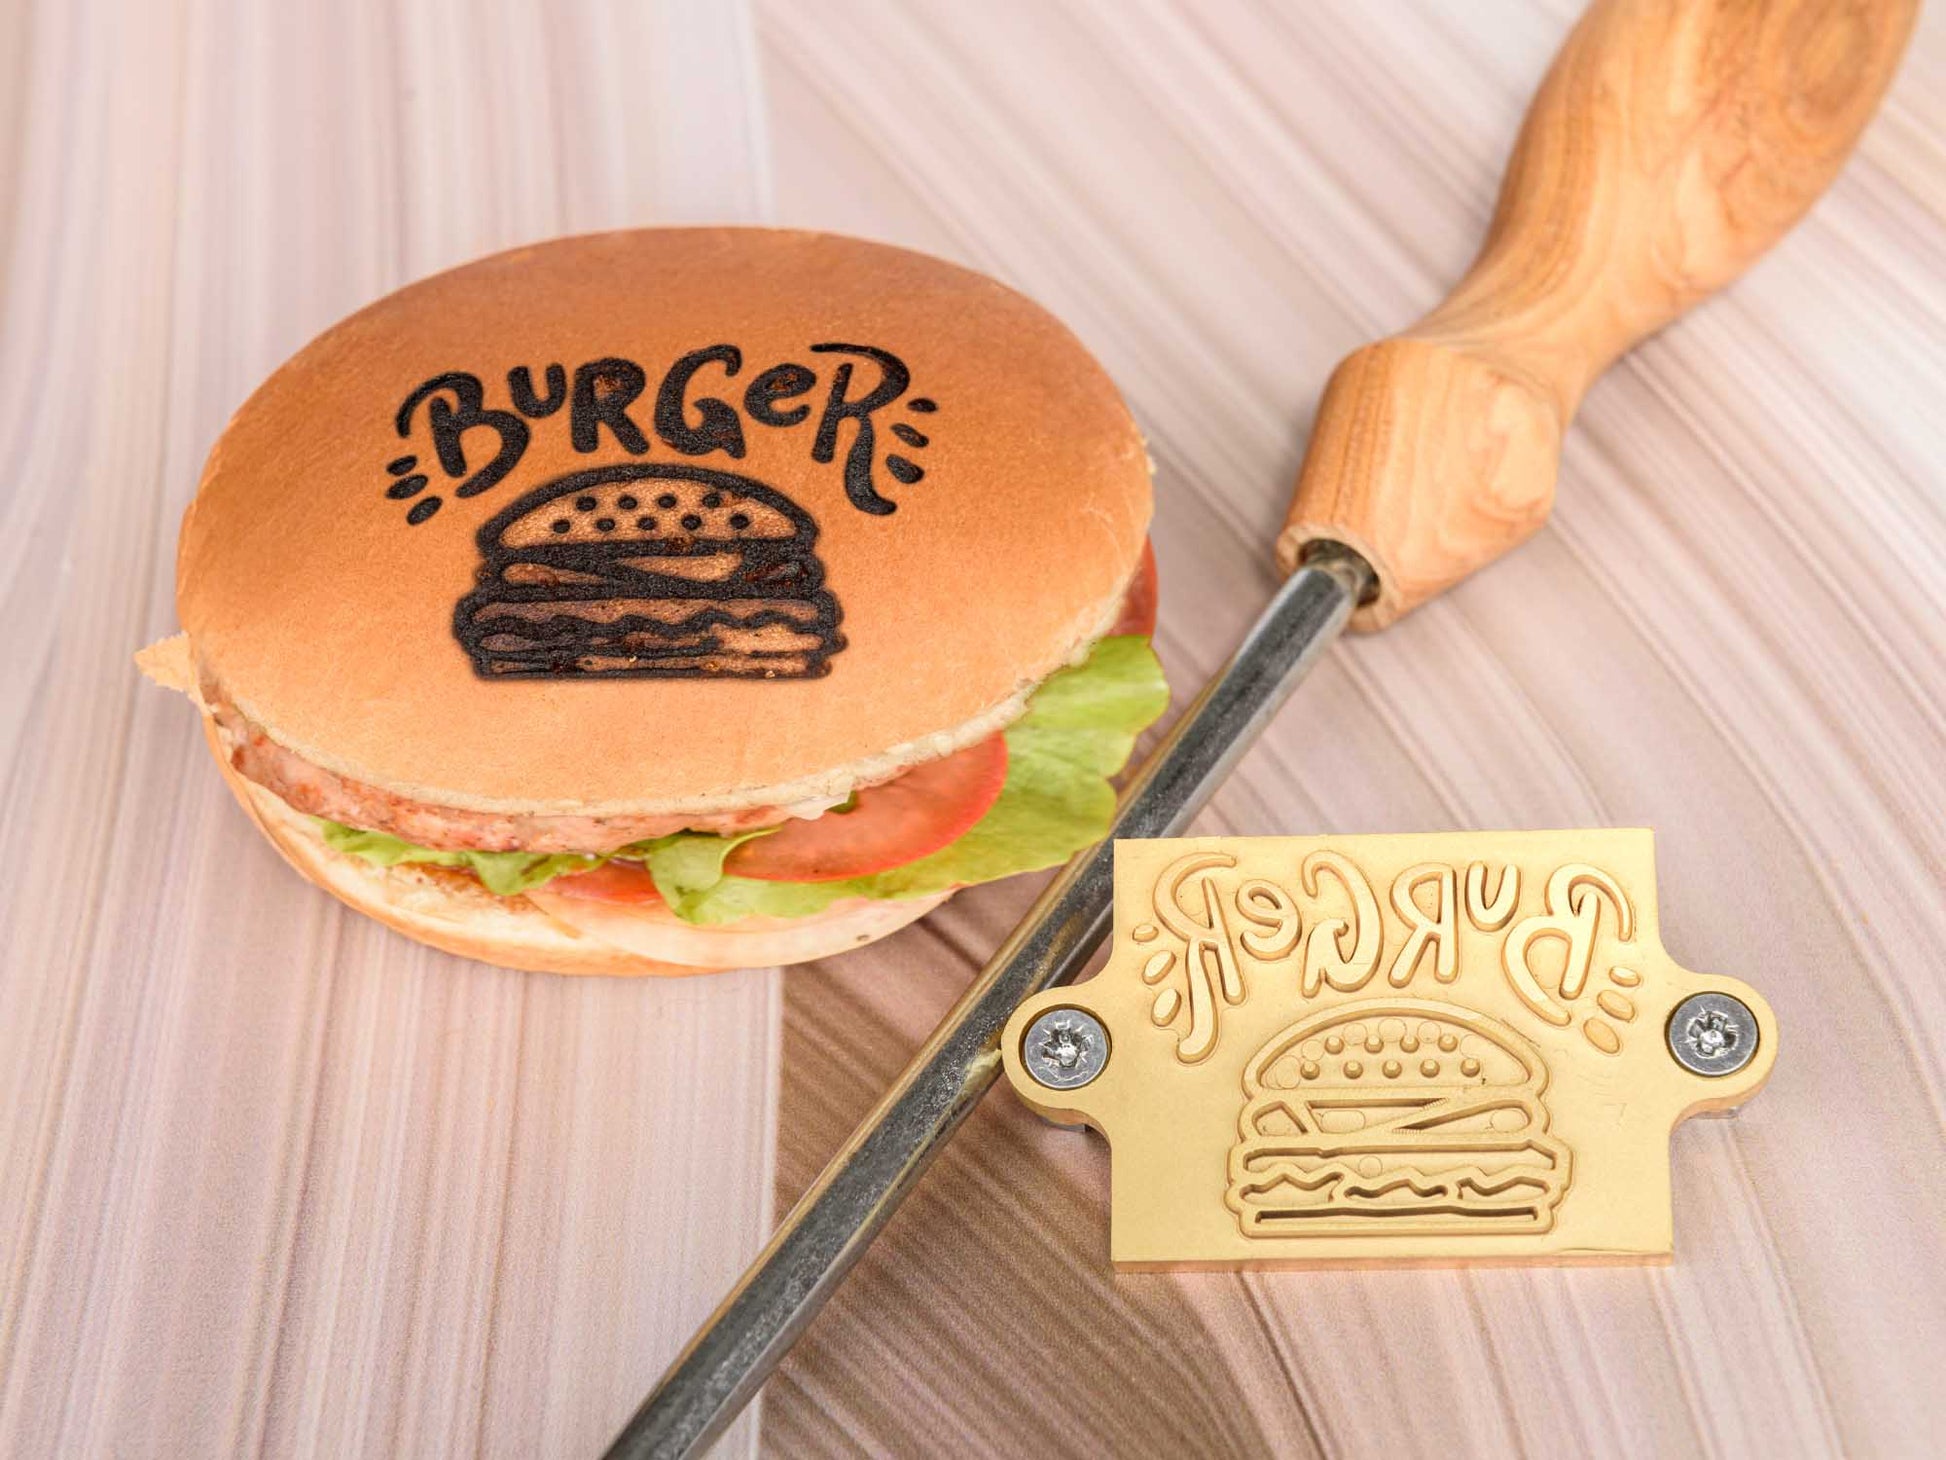 Personalized Branding Irons for Burgers, Steaks & BBQ